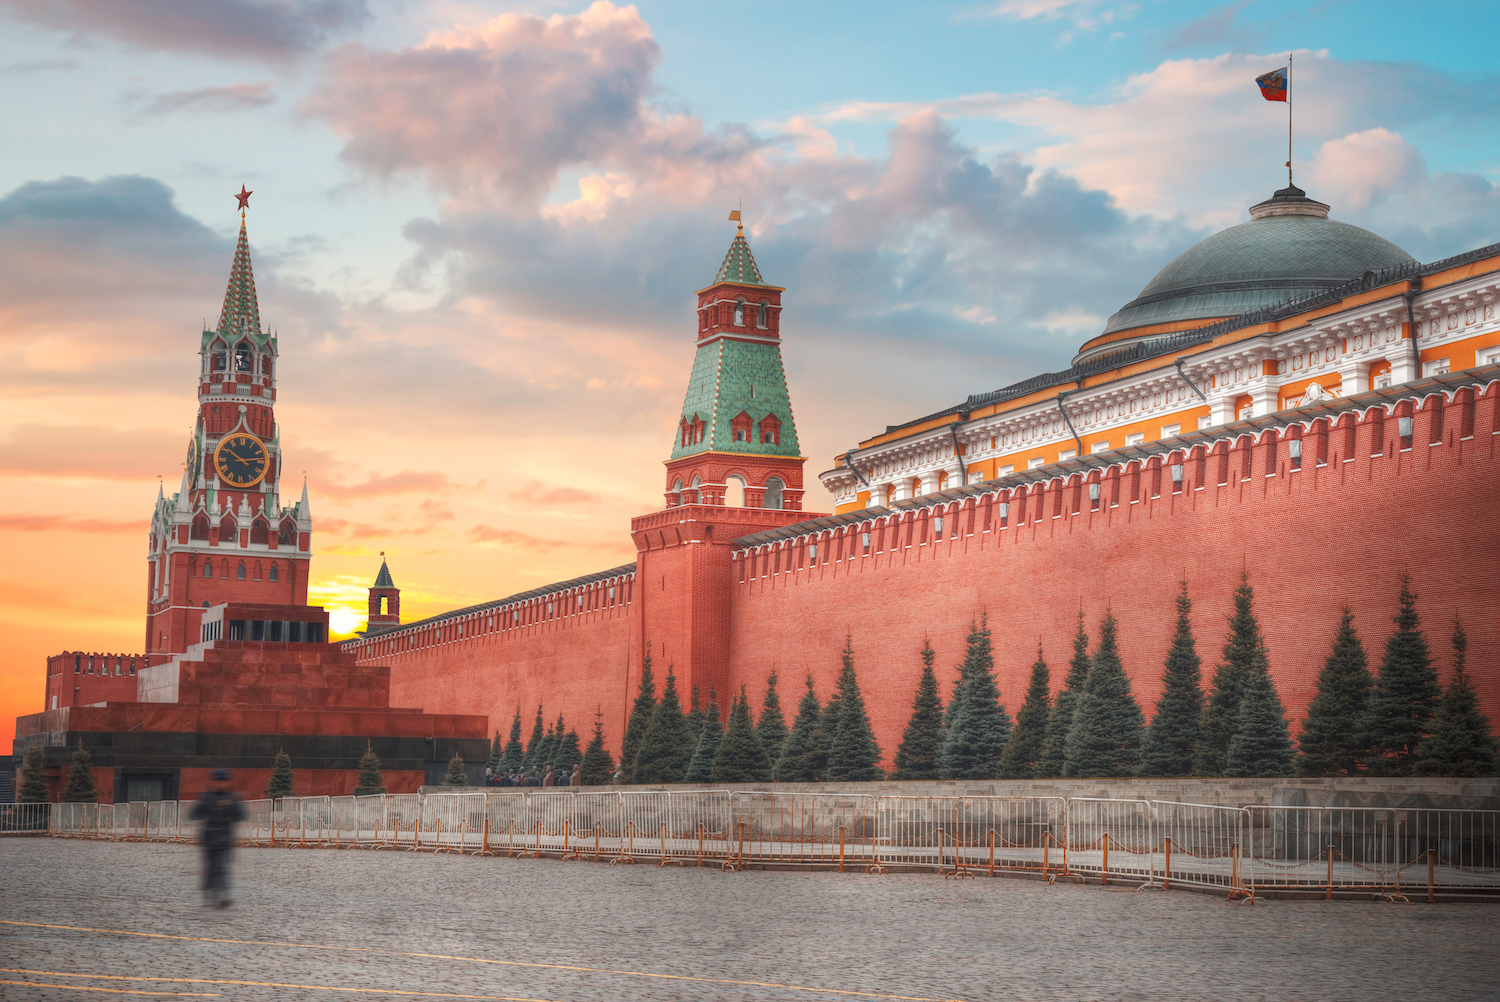 Moscow To Develop A Blockchain System For Transparent City Services